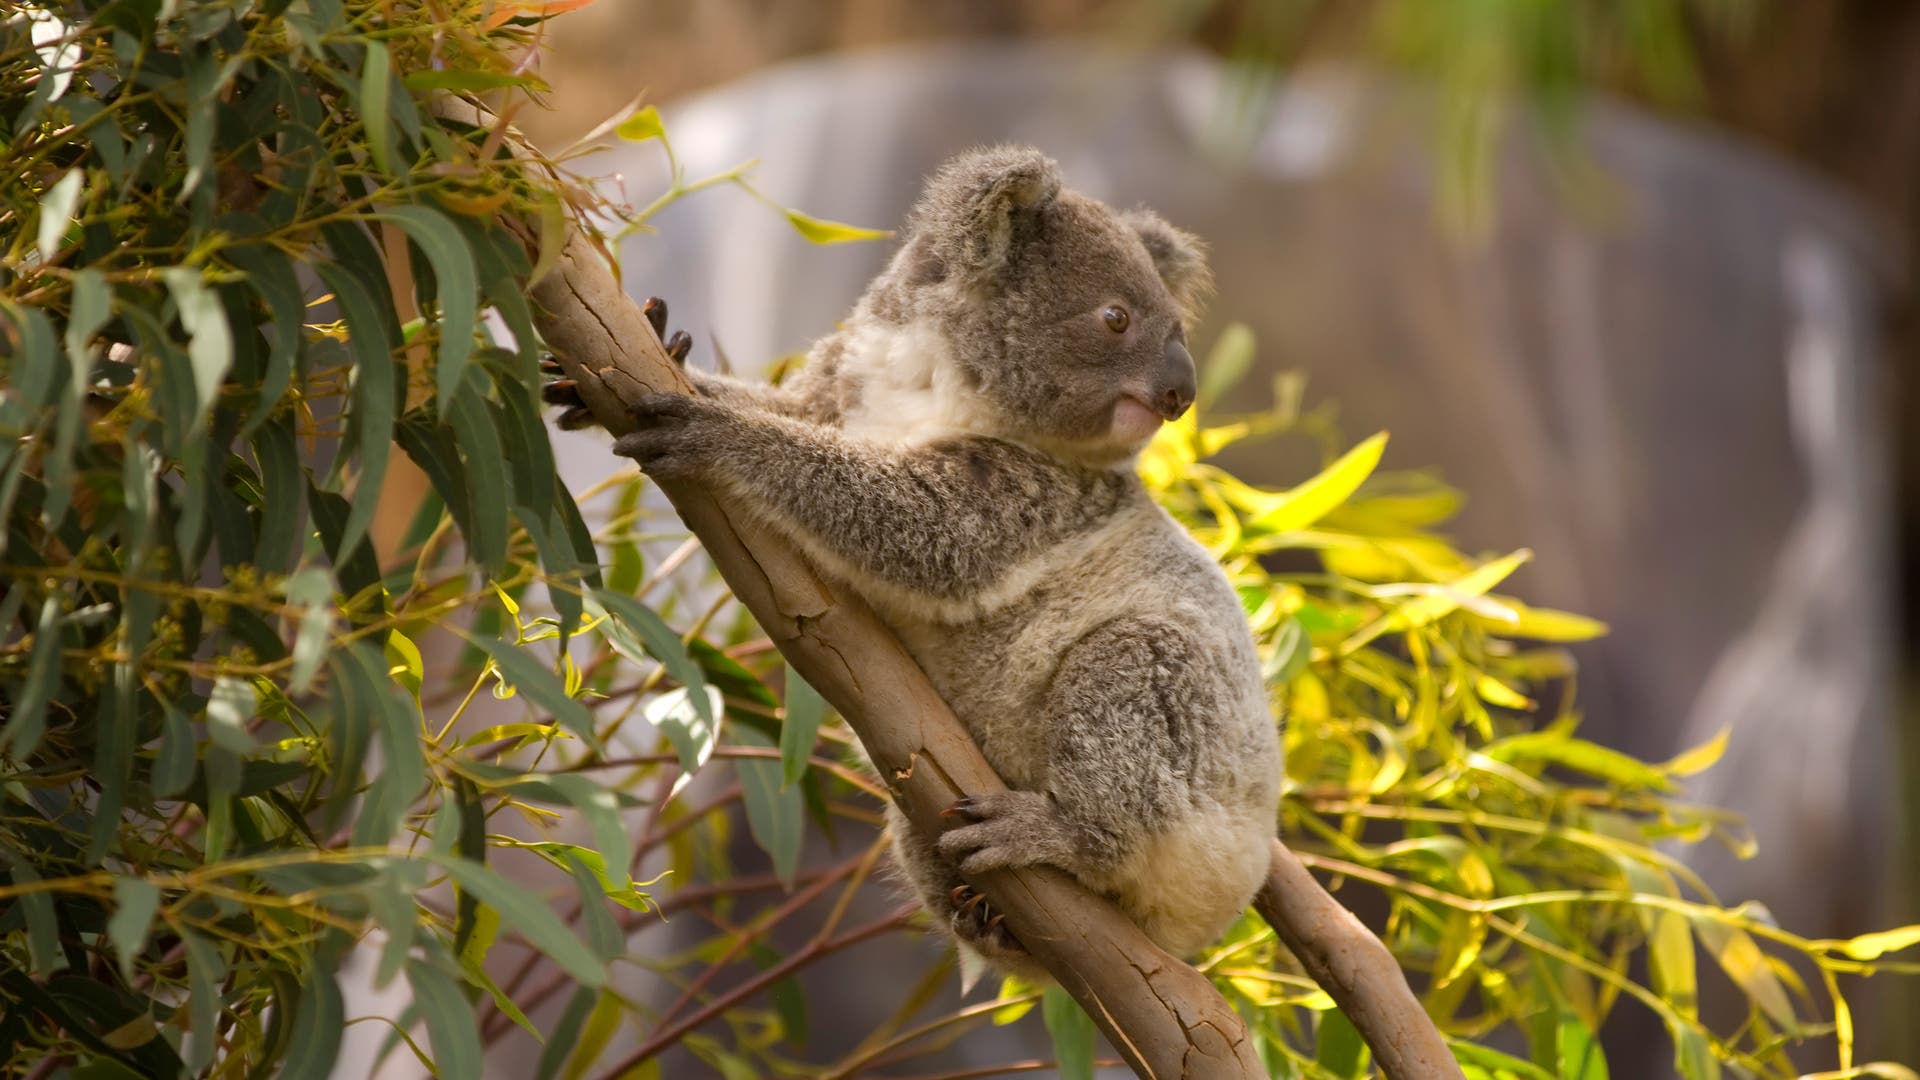 Australia: The number of koalas is declining rapidly